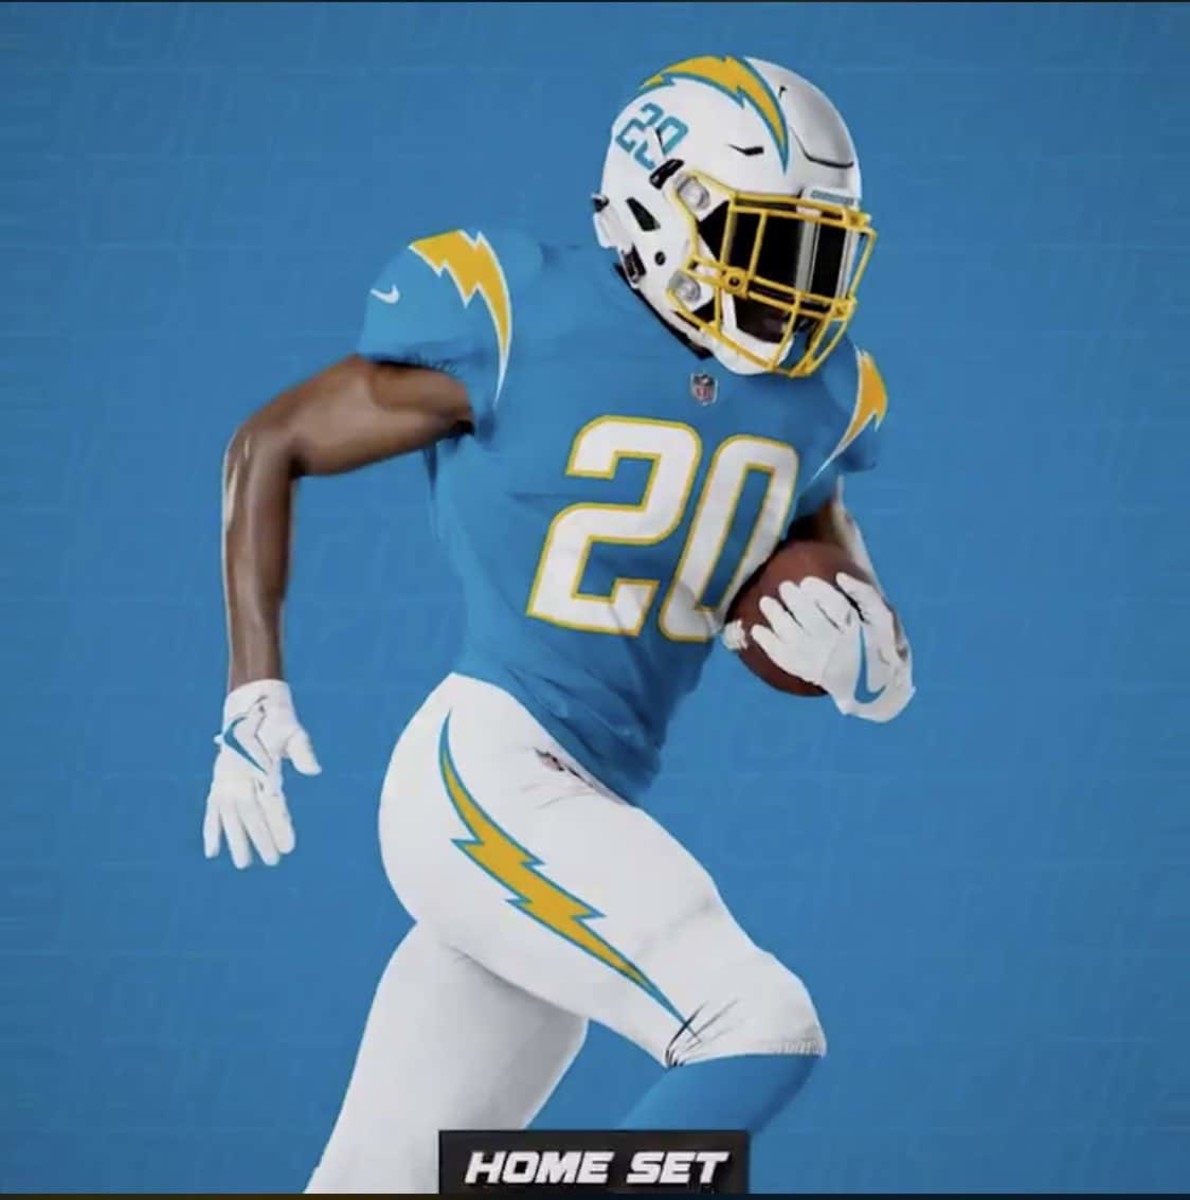 The @chargers uniforms have had quite the glow up over the years😍 For  their first season at SoFi Stadium, they're going with a fresh new…